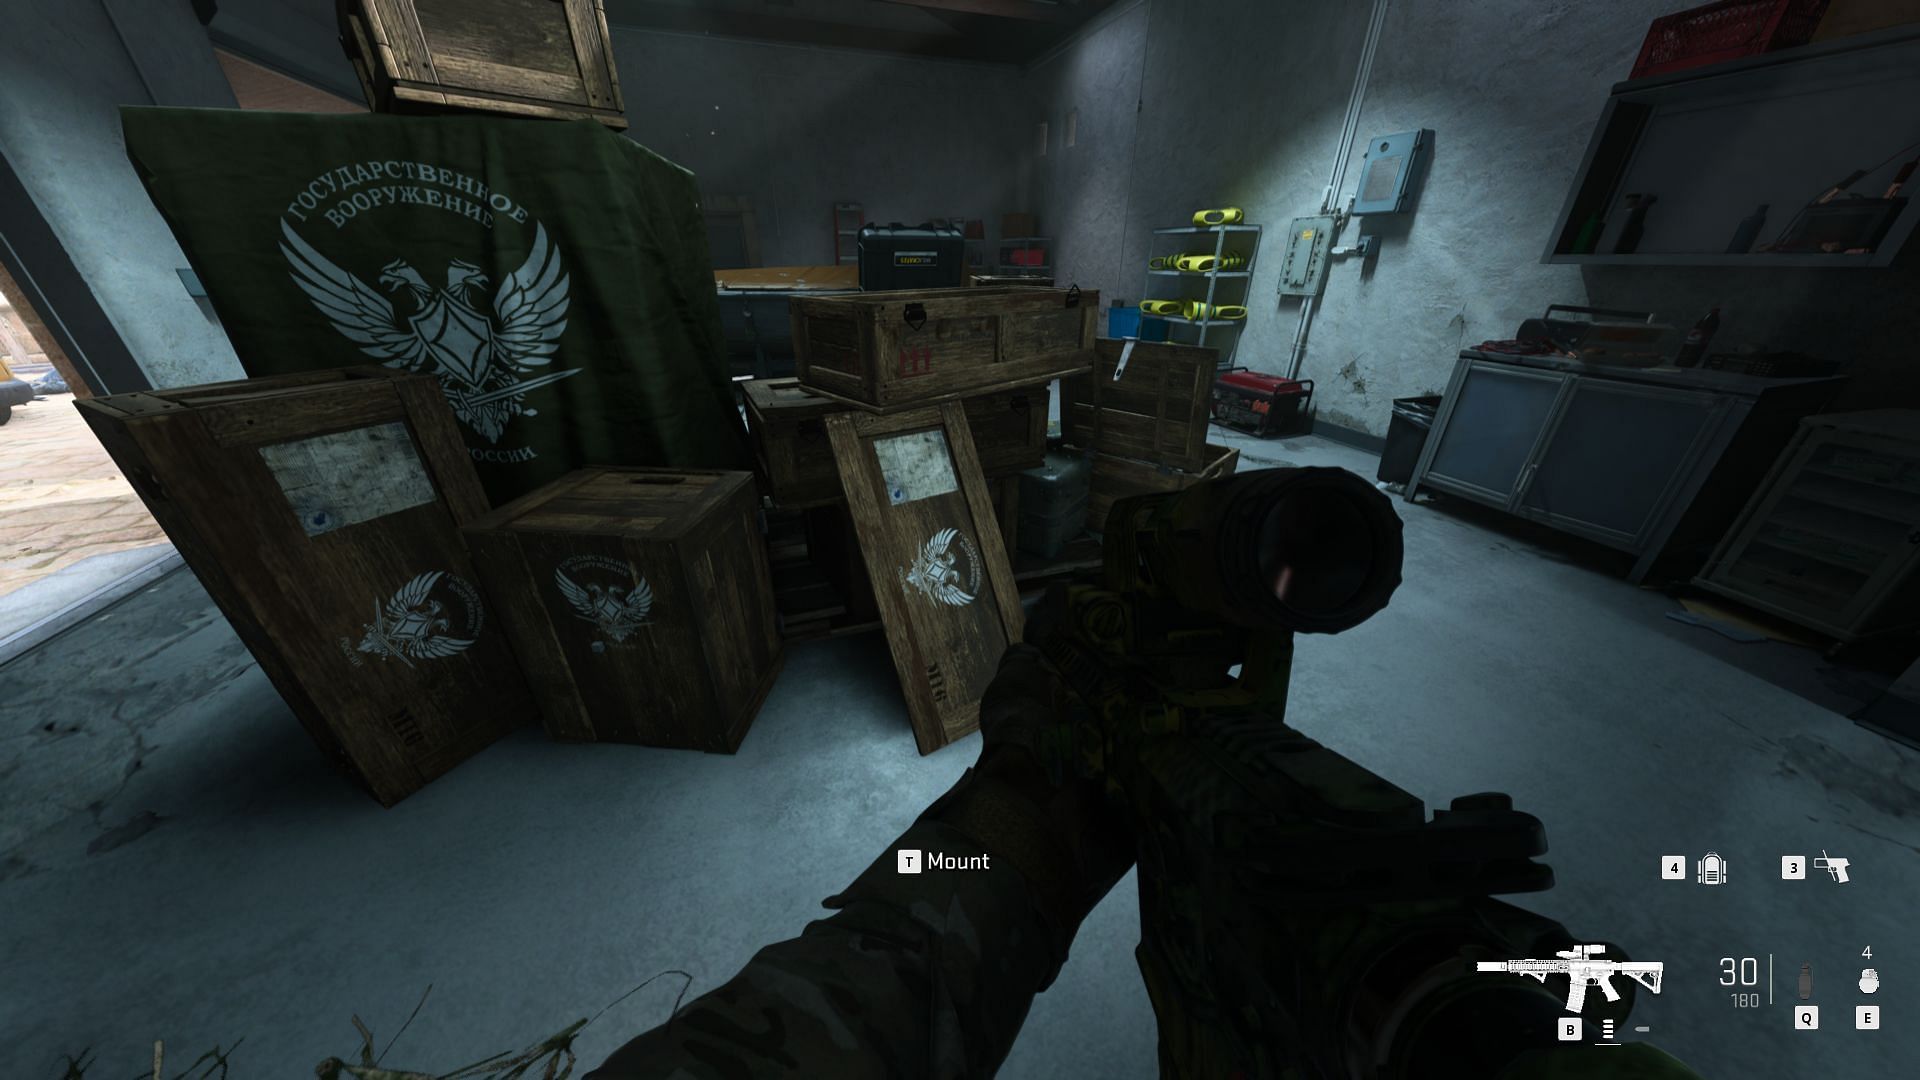 Russian contraband in the first house (image via Activision)